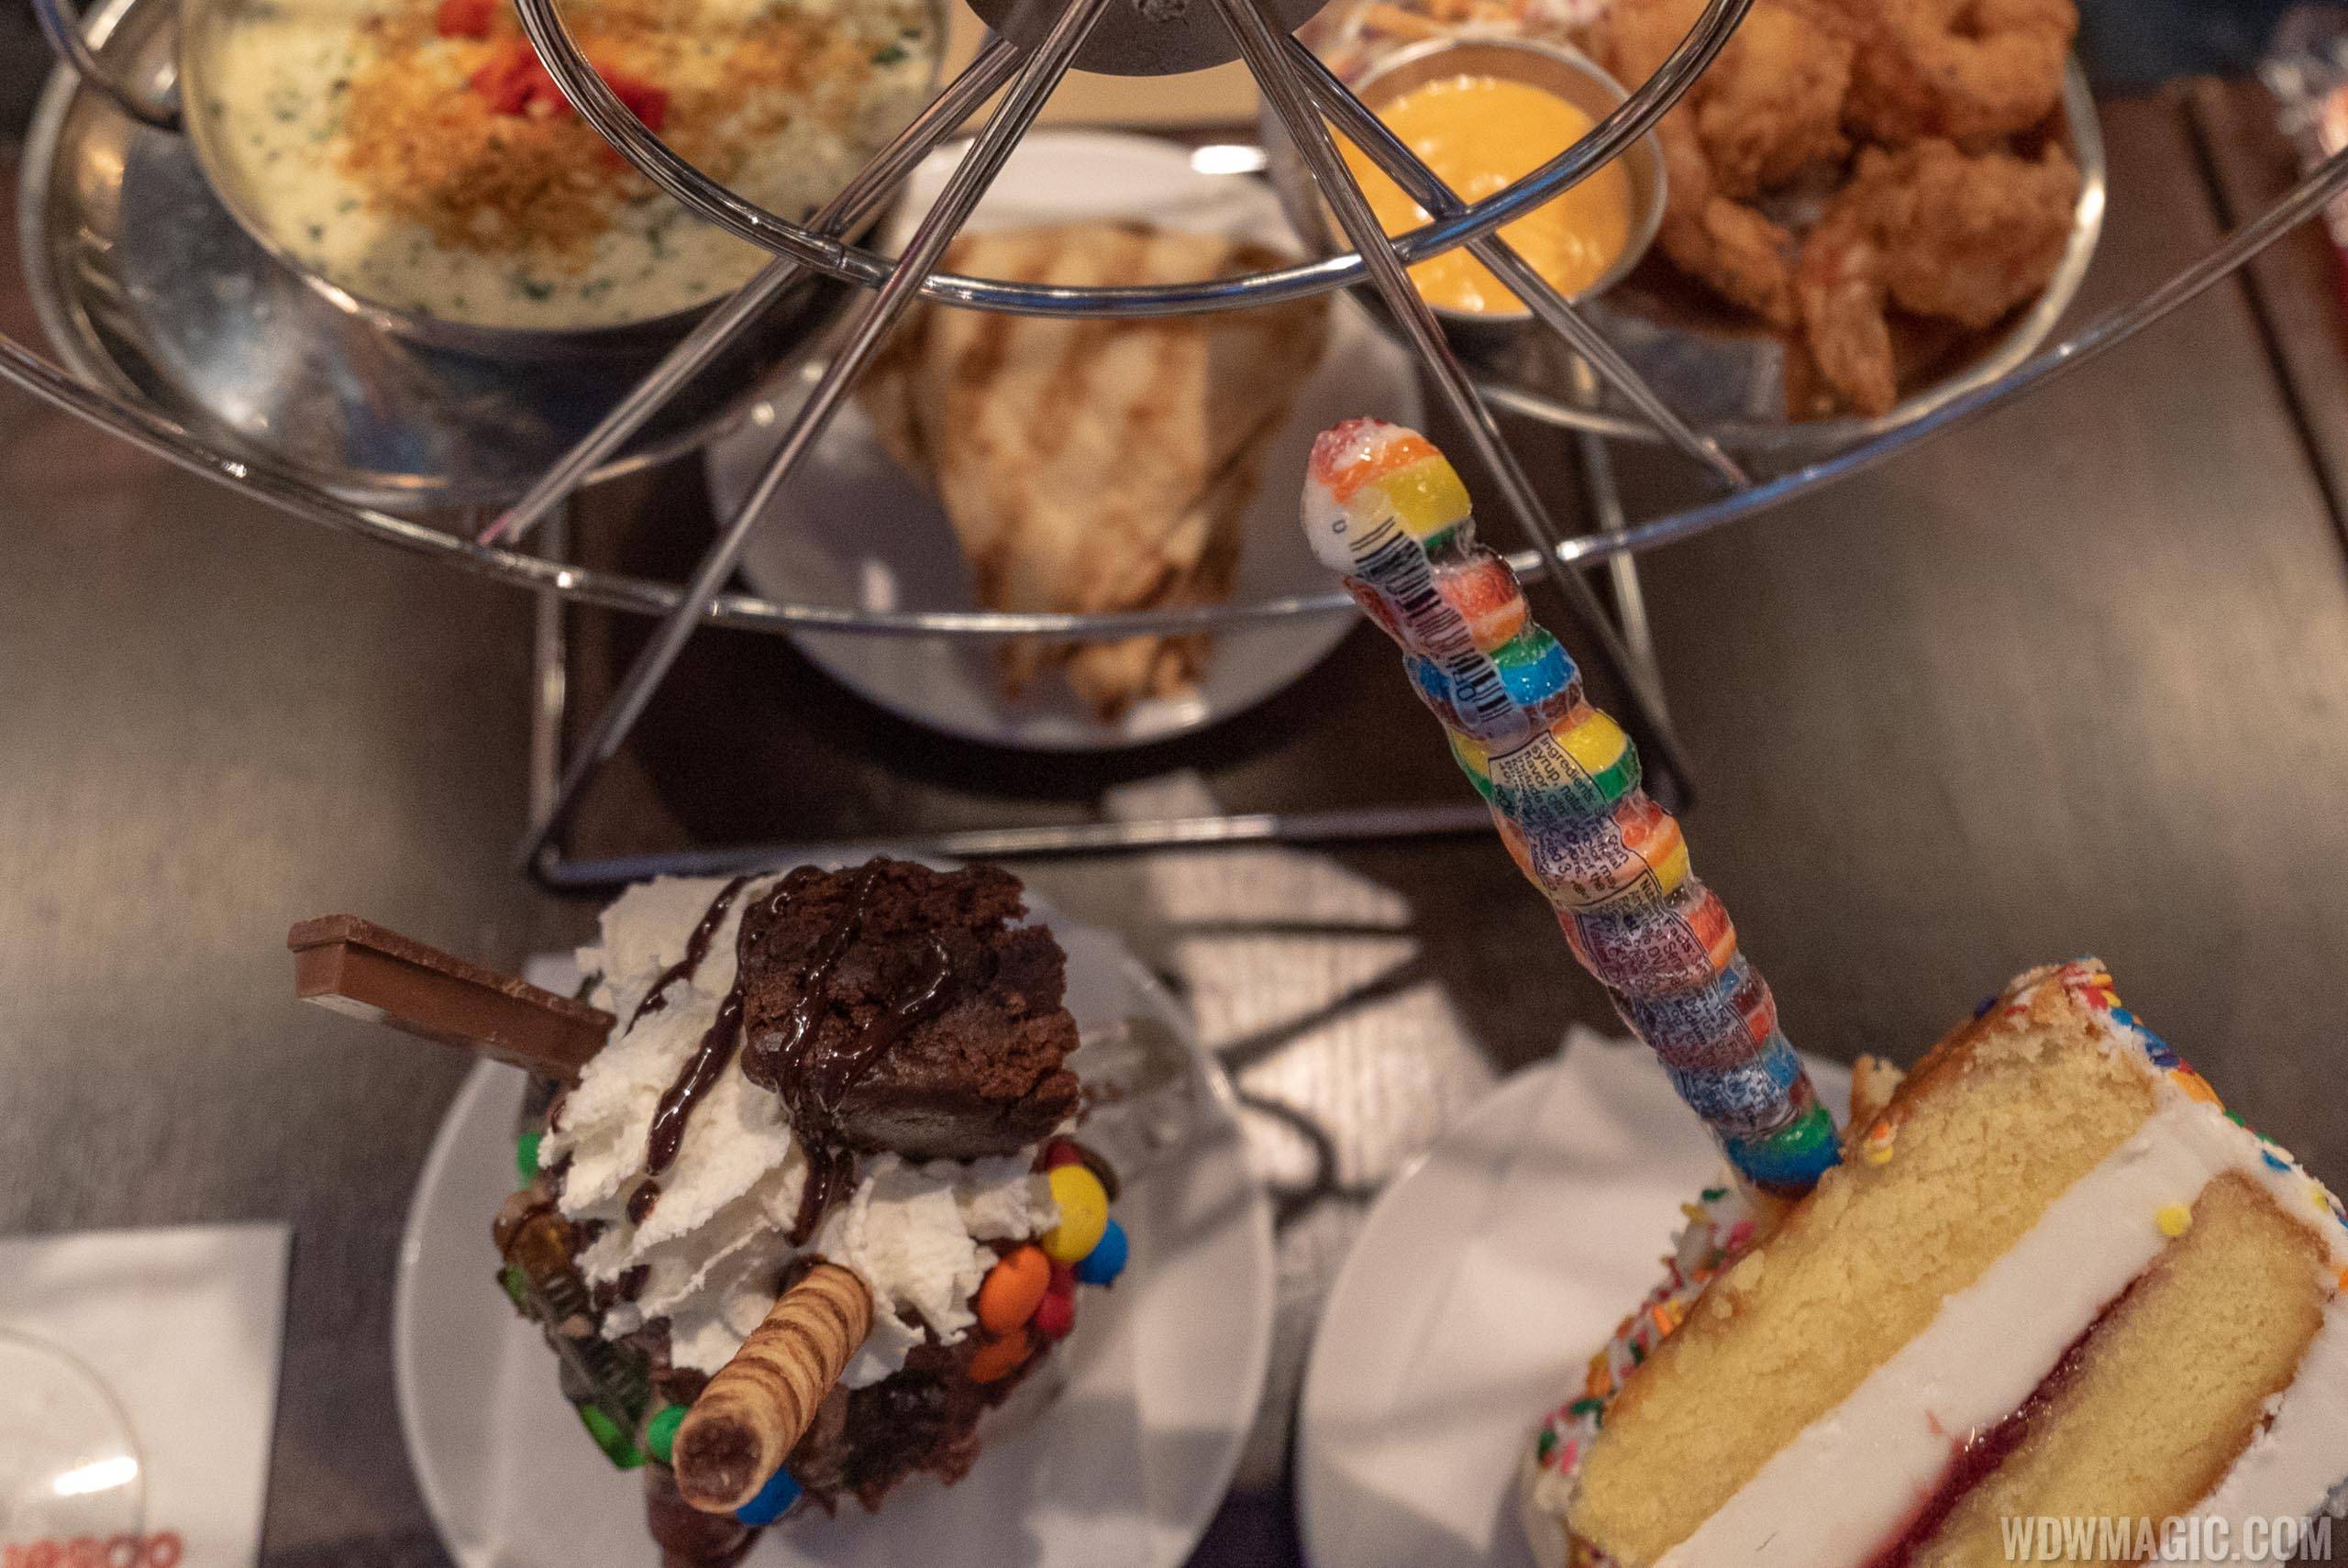 Planet Hollywood Observatory food and drink 2019